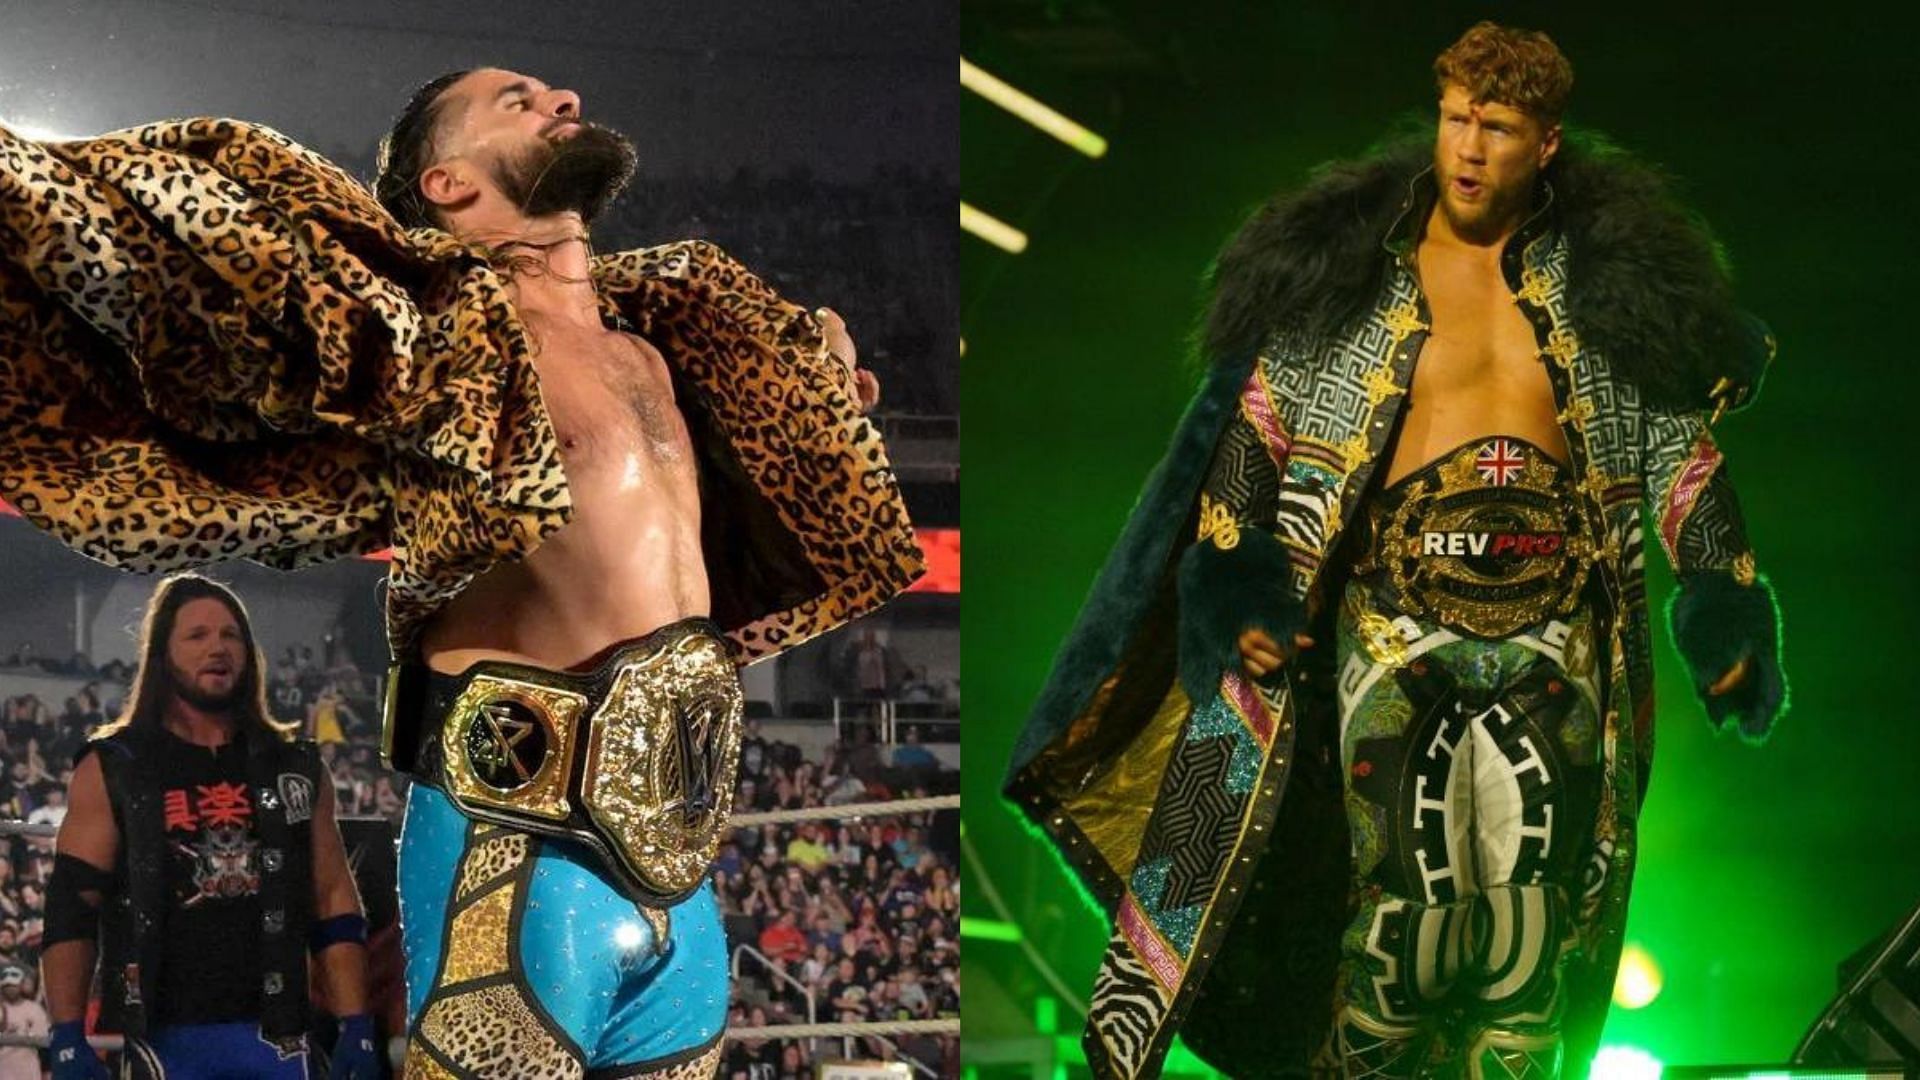 Seth Rollins has sent a message to Will Ospreay on social media